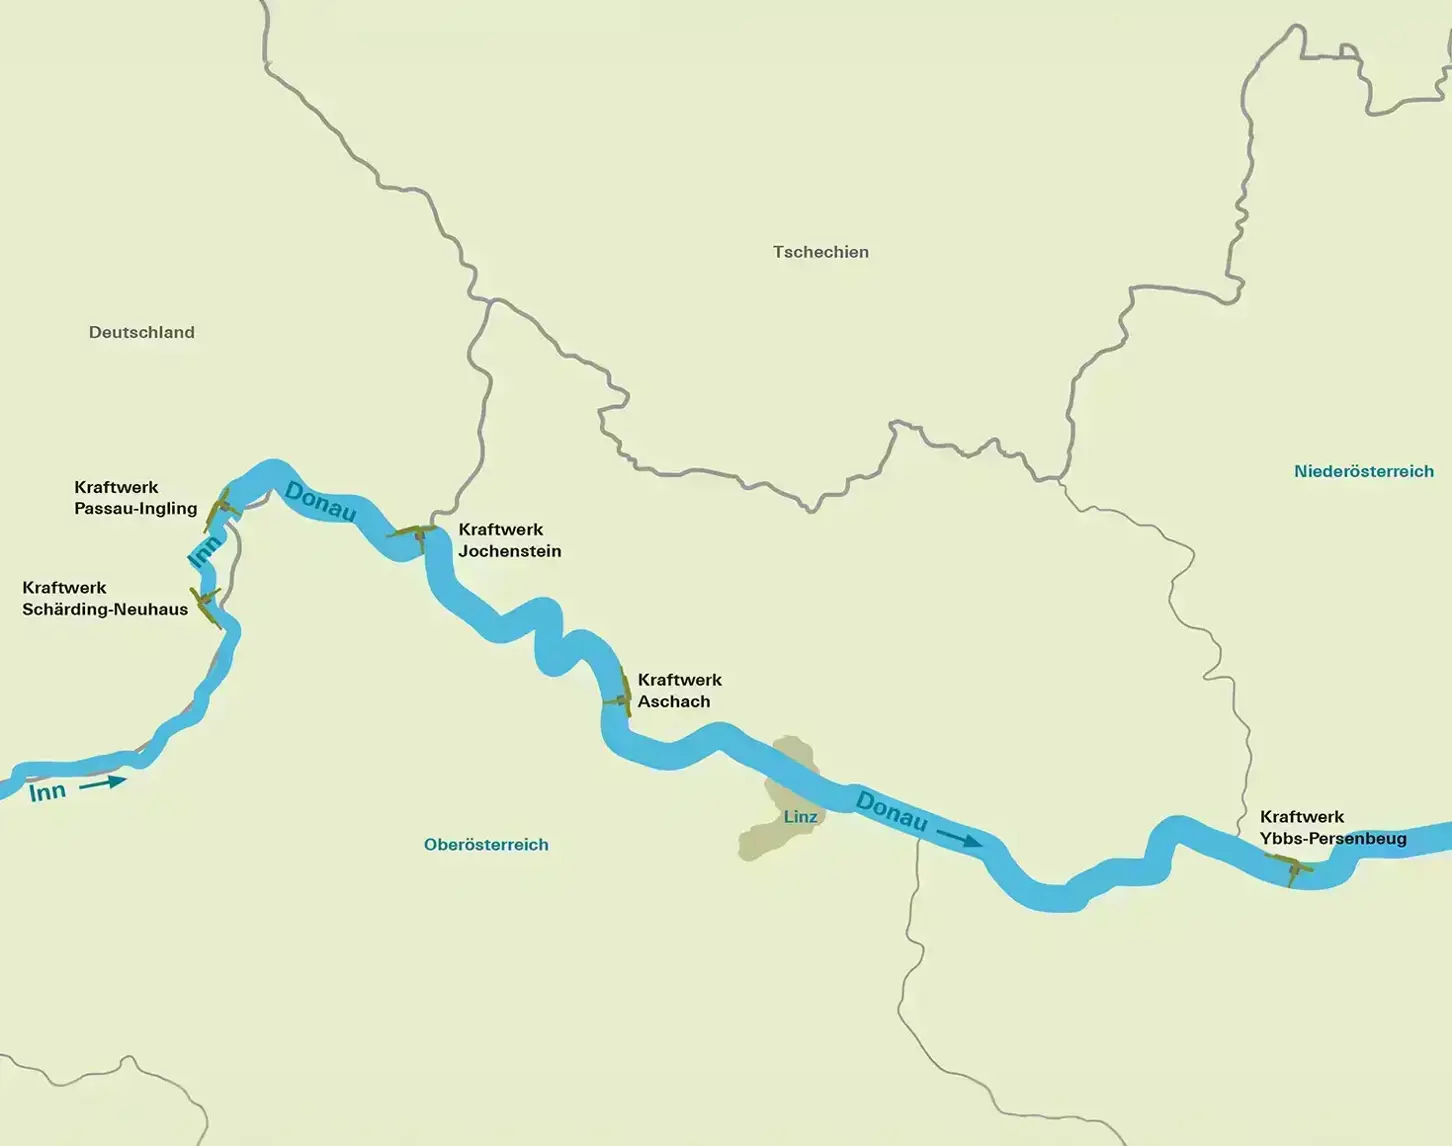 This is a map of the Danube / Inn in Upper Austria for the LIFE Blue Belt Danube Inn sites. The Inn is shown on the left, flowing to the right. It first flows through the Schärding-Neuhaus power plant and then the Passau-Ingling power plant. The Inn then flows into the Danube, which flows further to the left on the map, passing the Jochenstein power station, Aschach and Ybbs-Persenbeug. Germany is shown at the top and the Czech Republic and Lower Austria to the right. Upper Austria is located below.